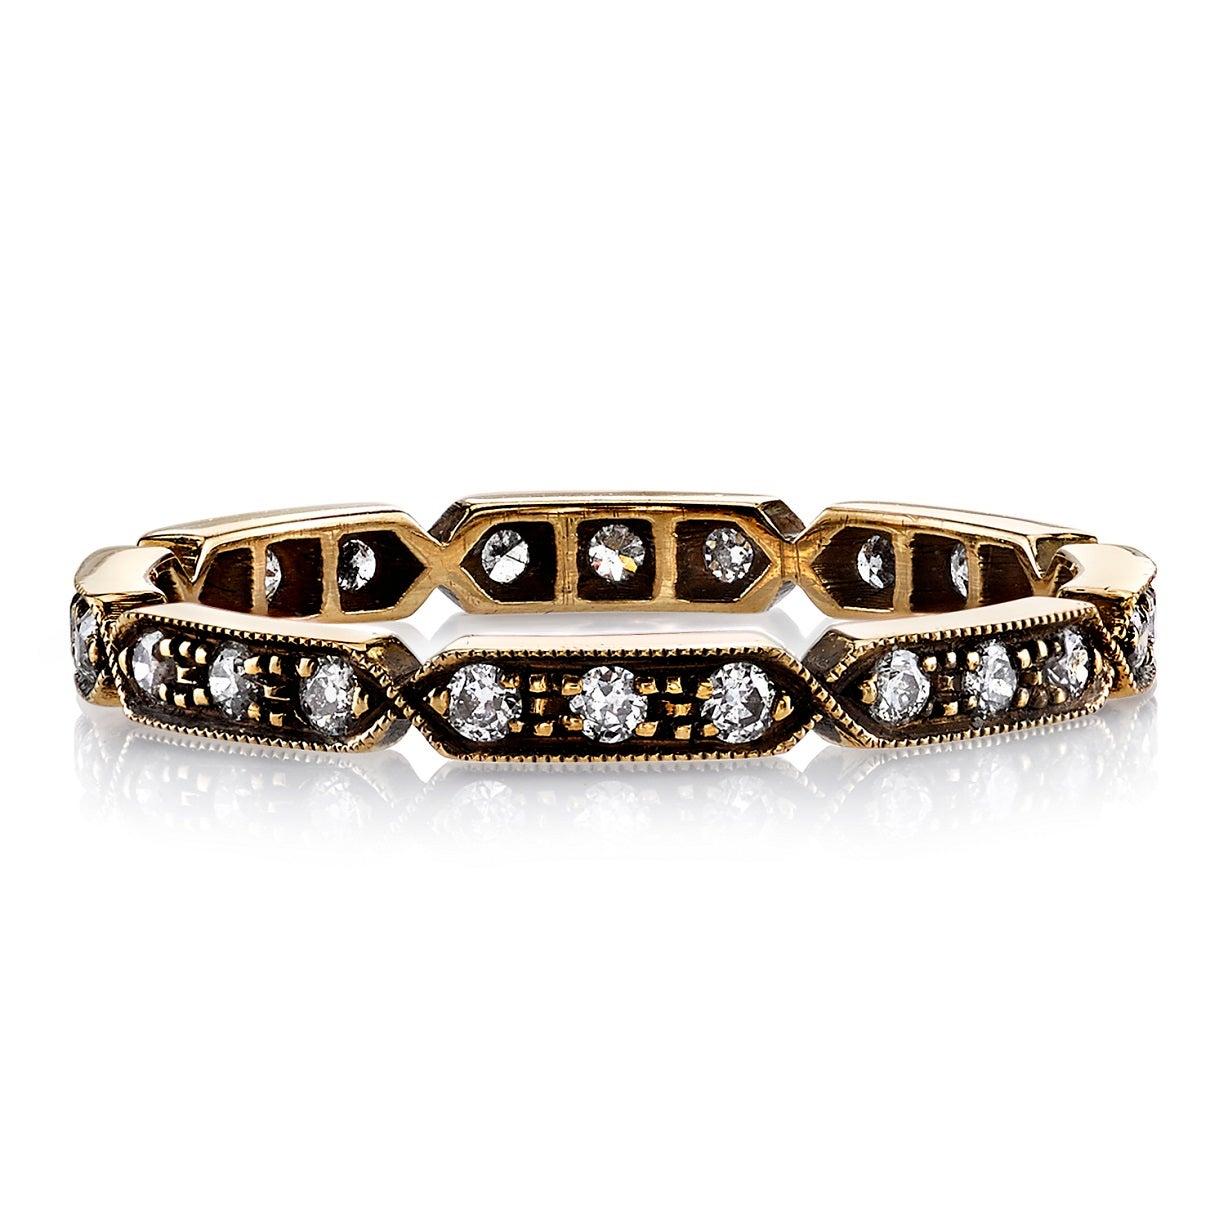 For Sale:  Handcrafted Carly Old European Cut Diamond Eternity Band by Single Stone 2